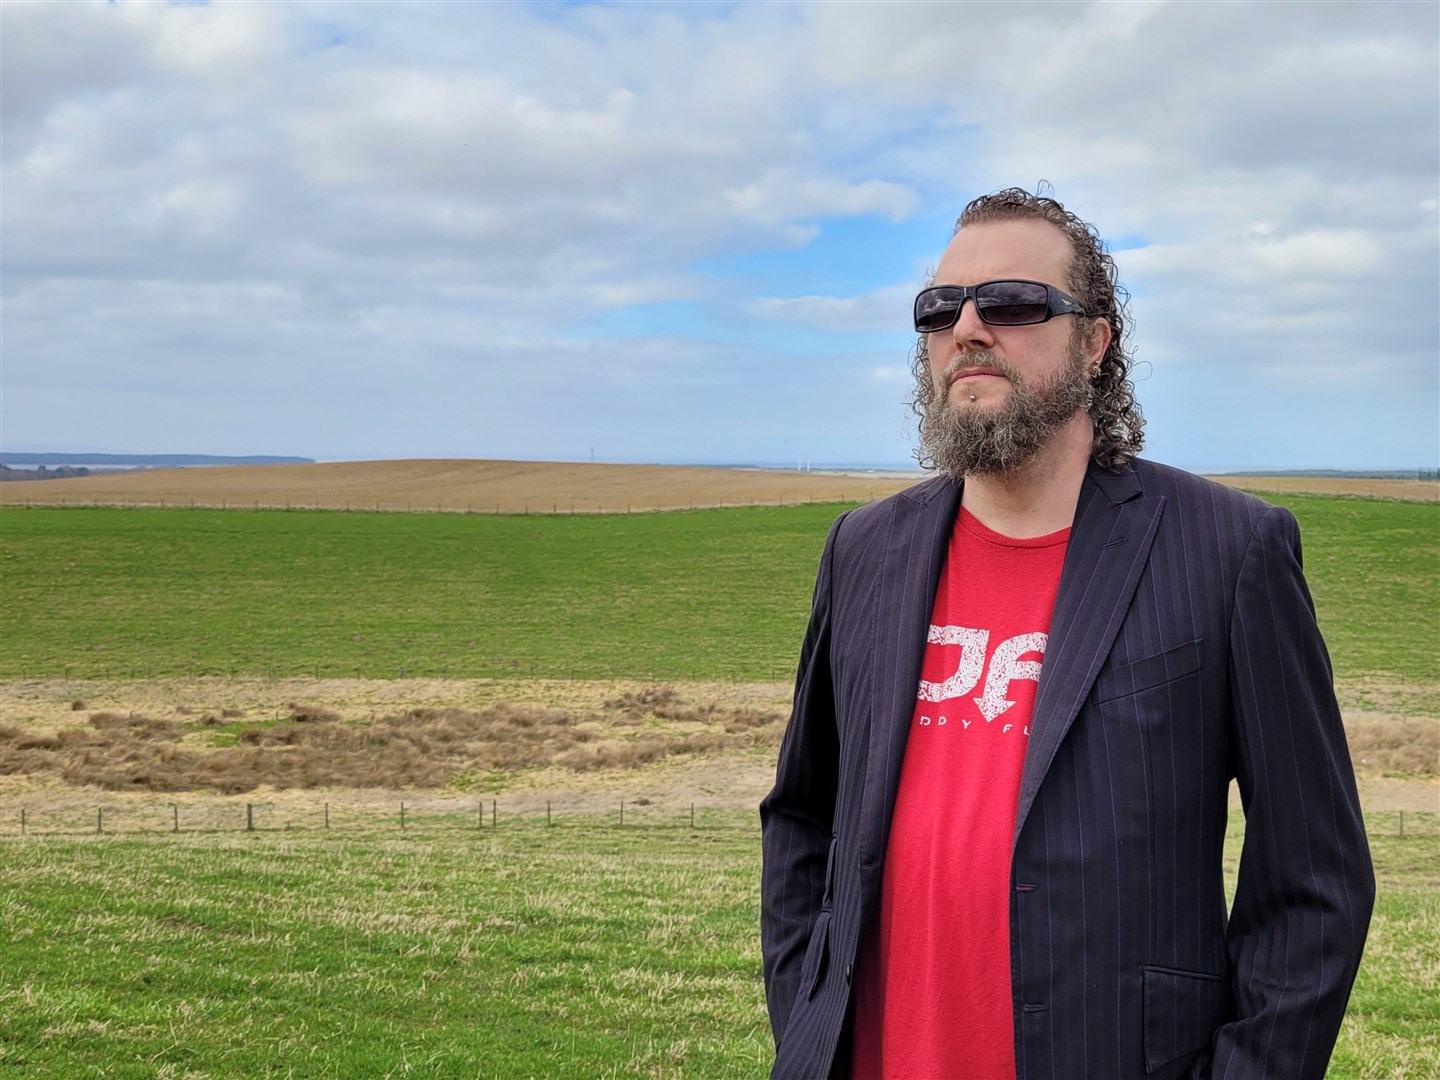 The Moray based musician recorded his latest music video near Findhorn.